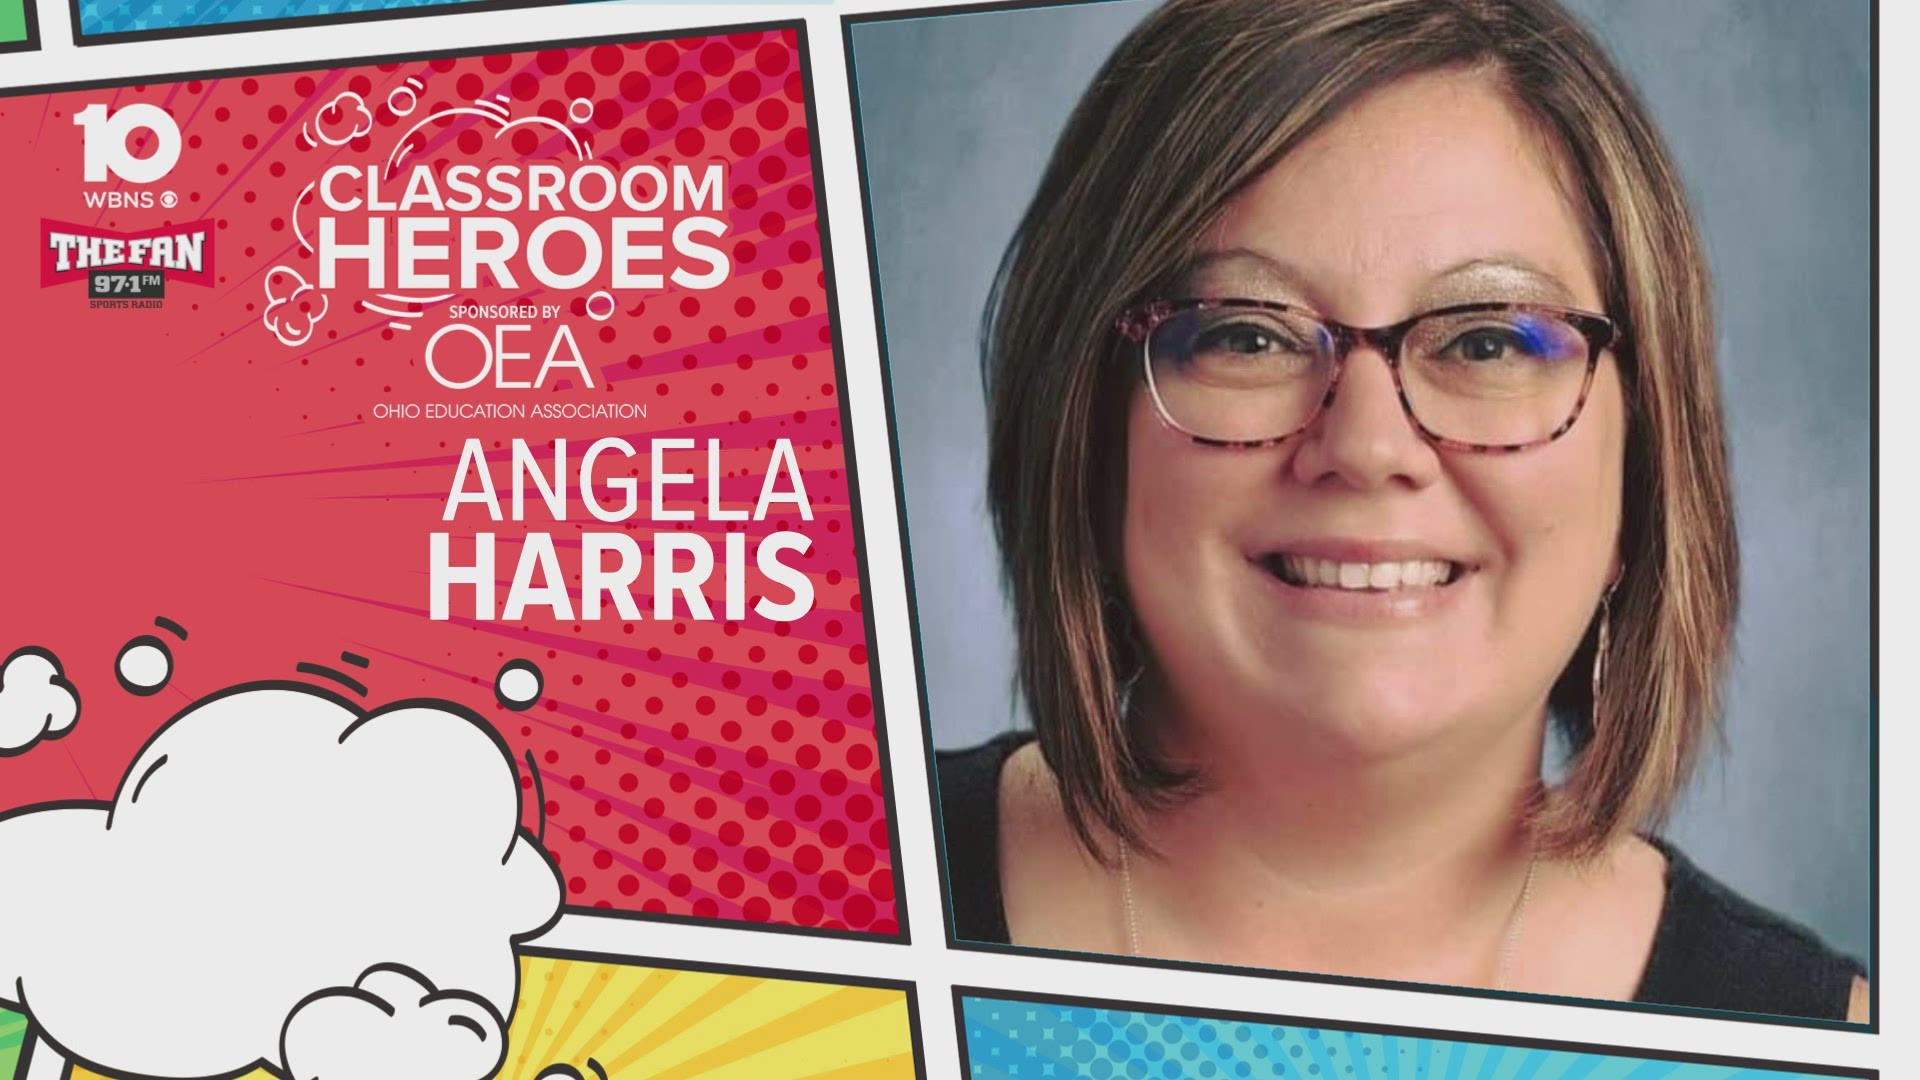 Angela Harris is a third grade teacher at Berne Union Elementary School and is our classroom hero this week.